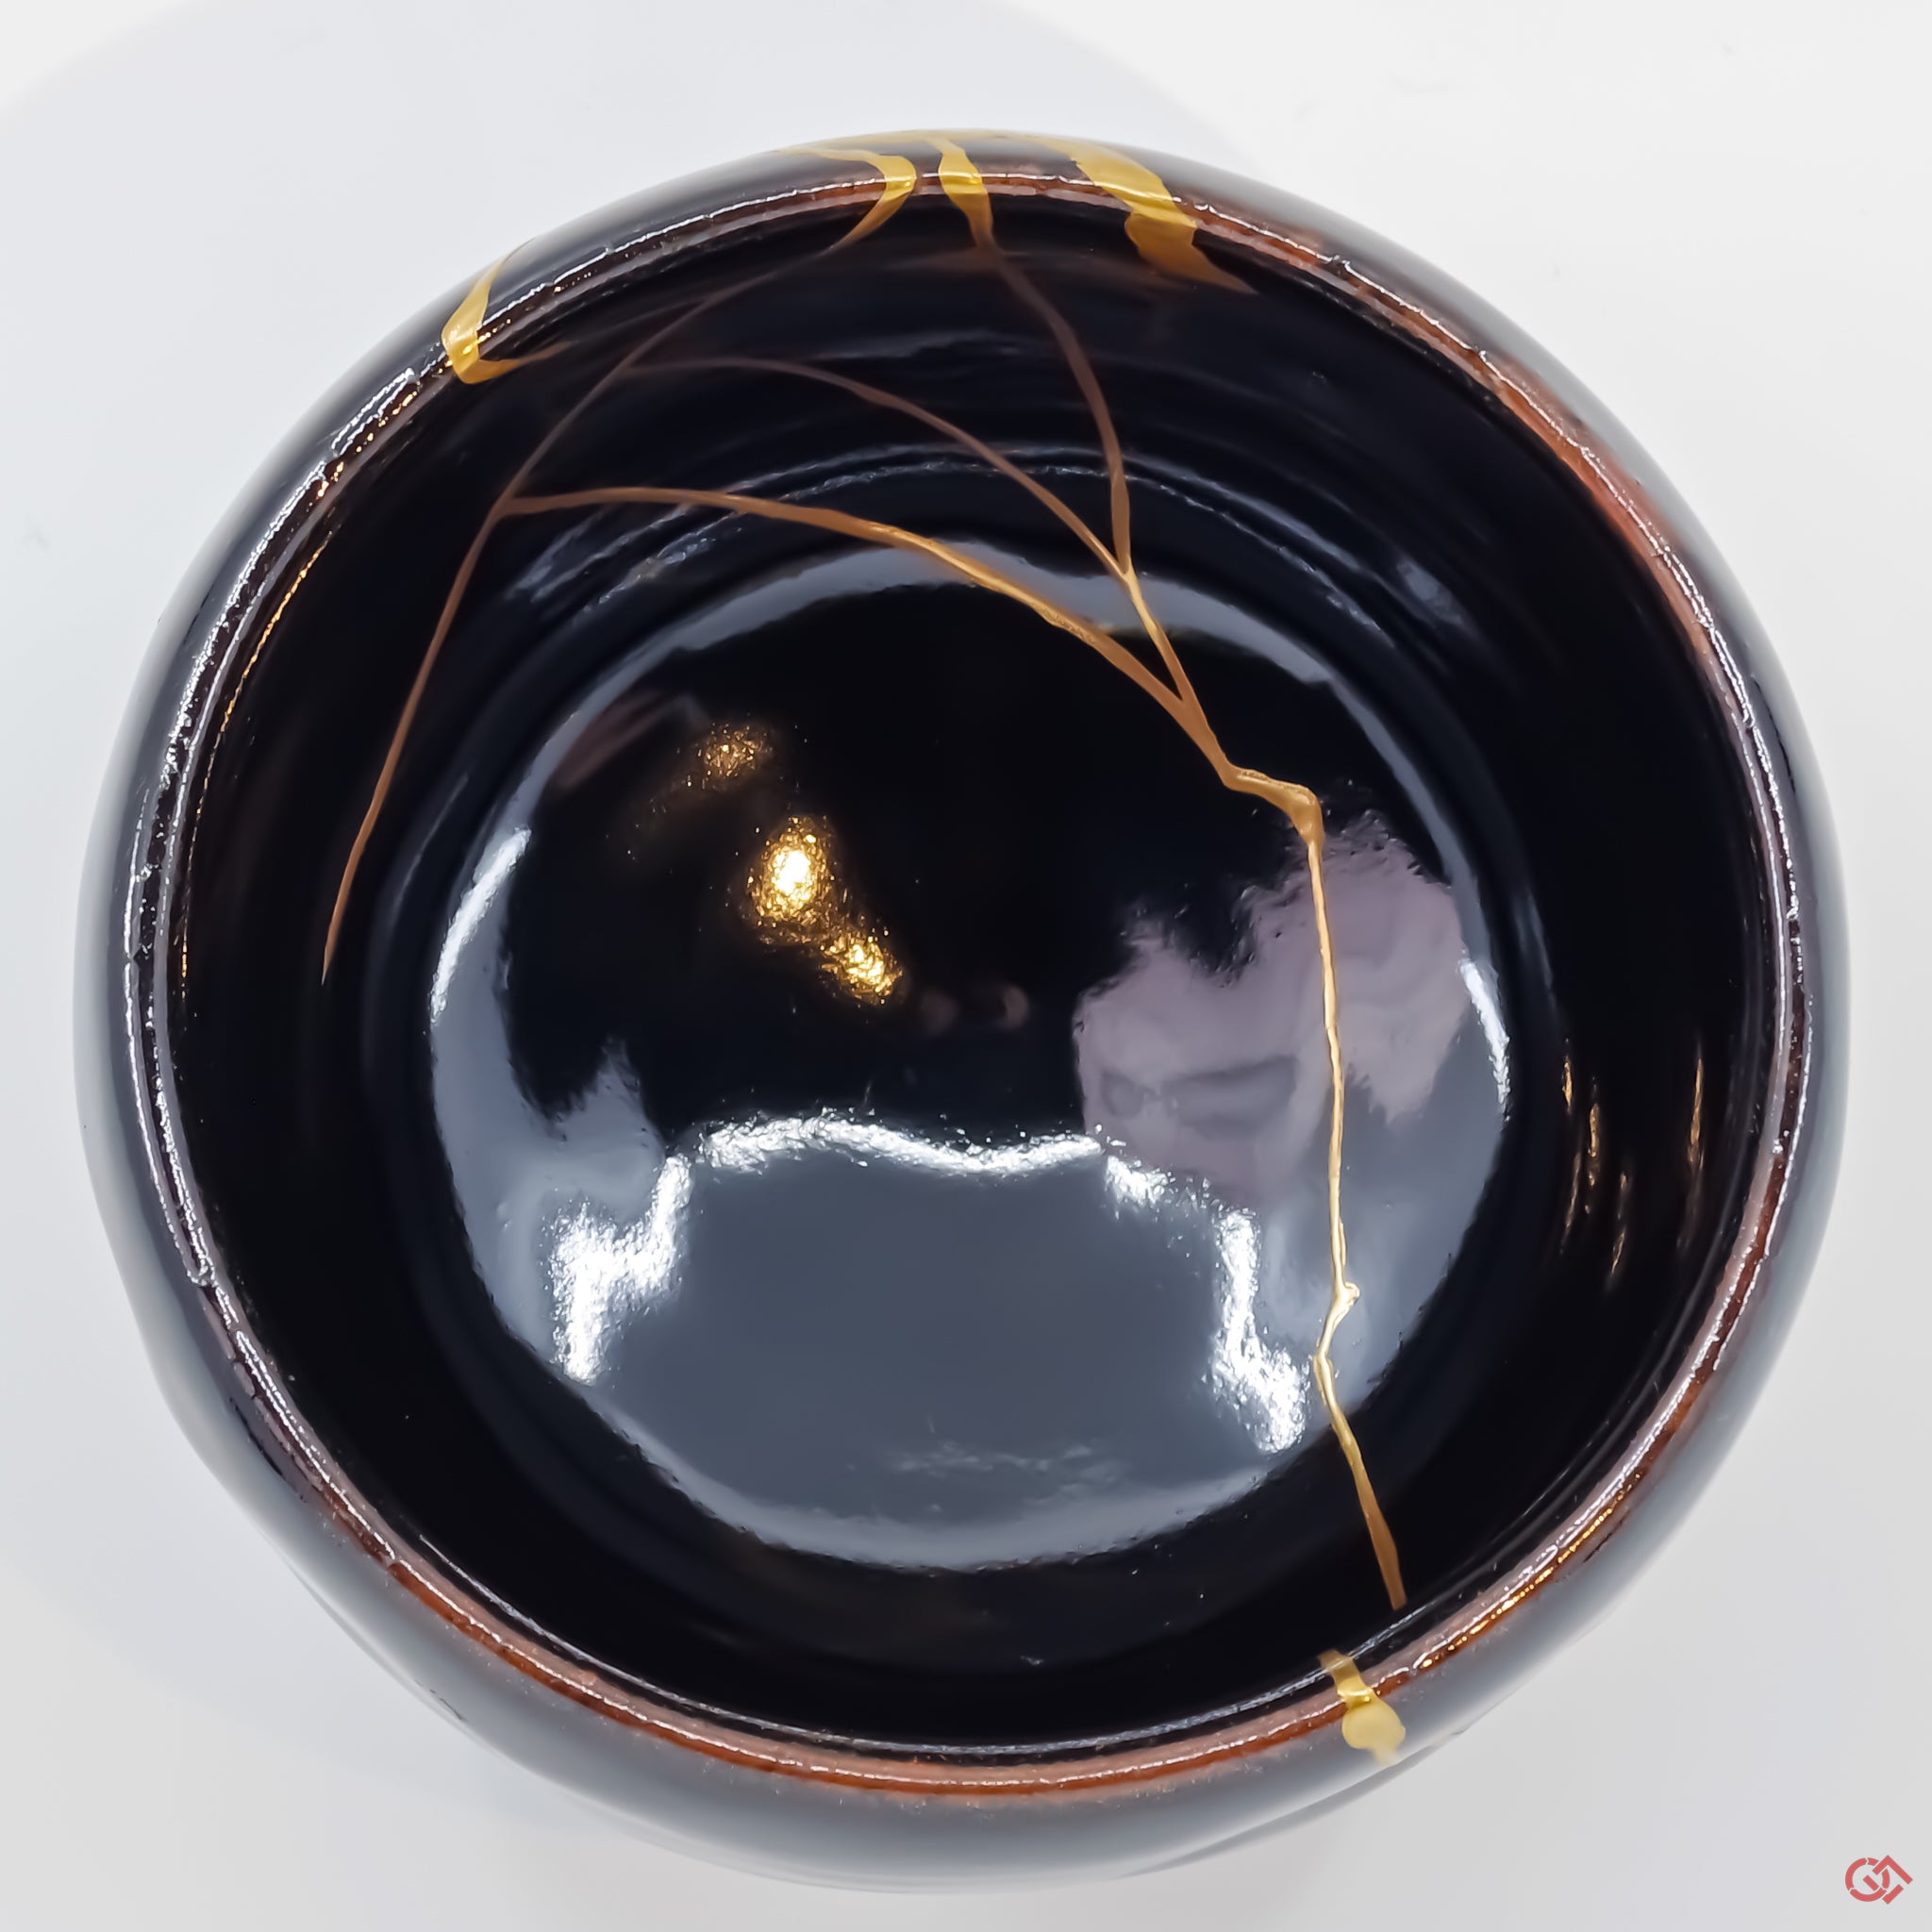 Photo of the bottom side of an authentic Kintsugi pottery piece, showing its overall design and features